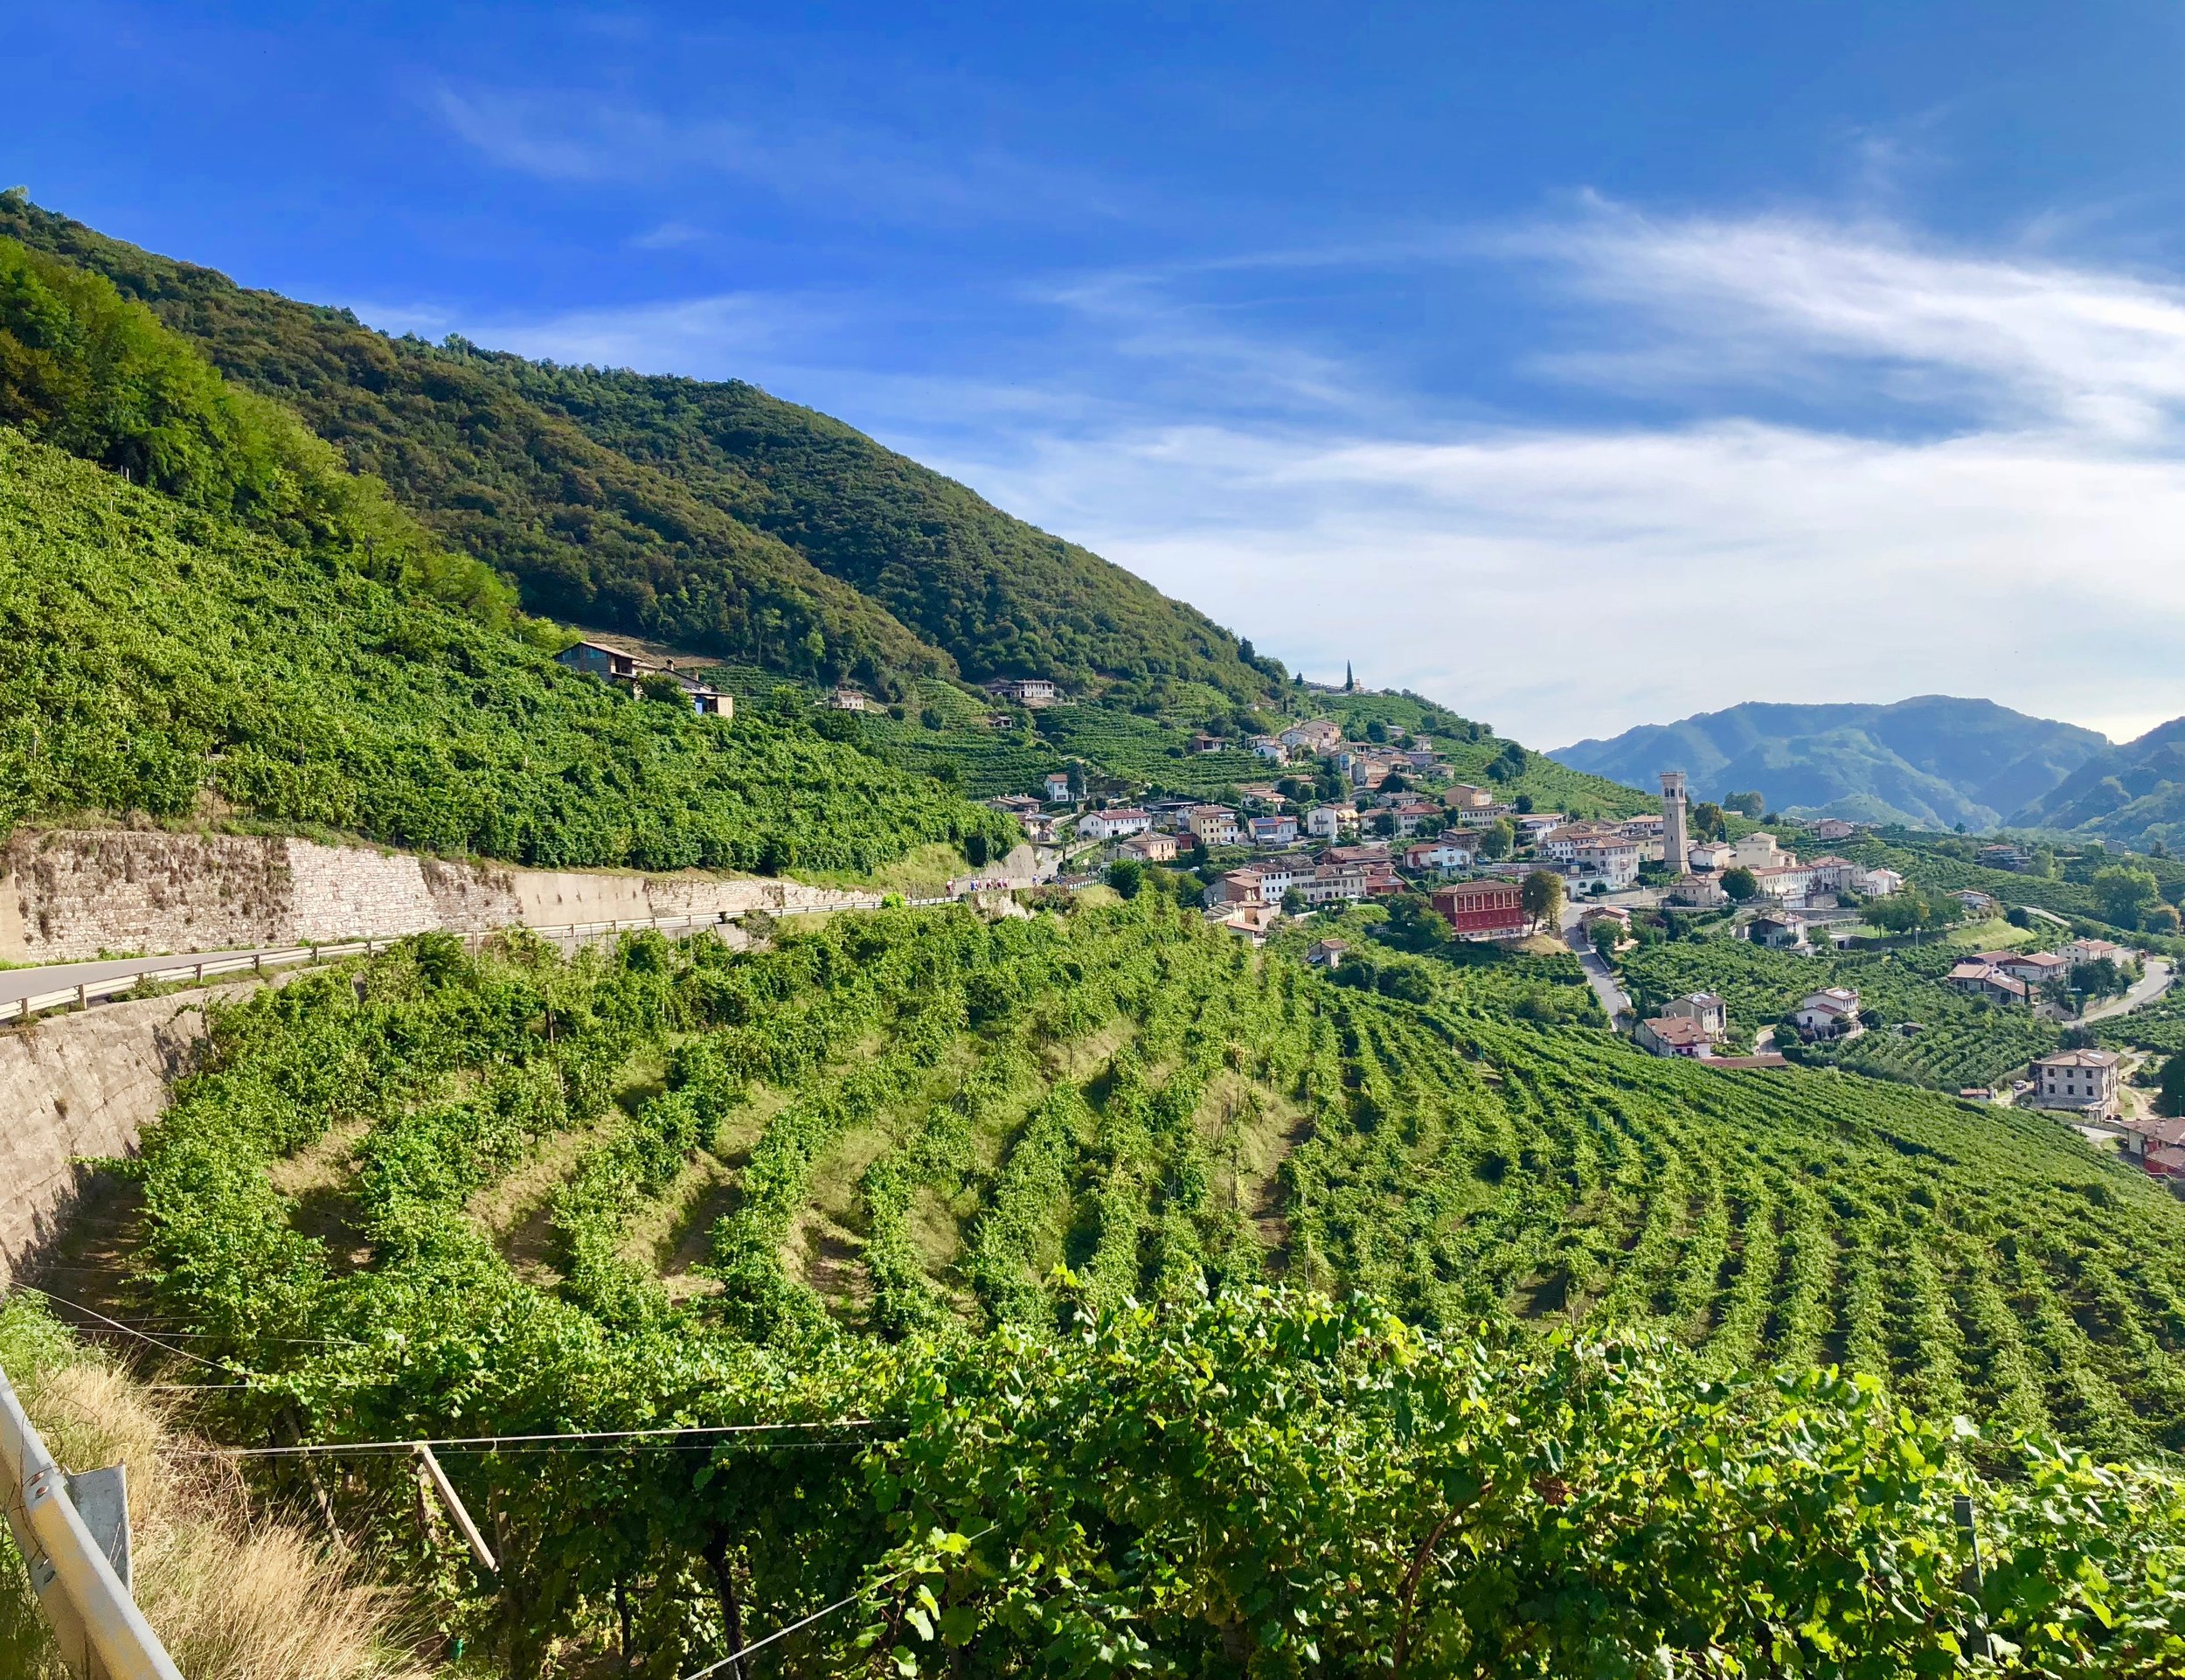 The Procecco wine region provide many spectacular scenes during our rides